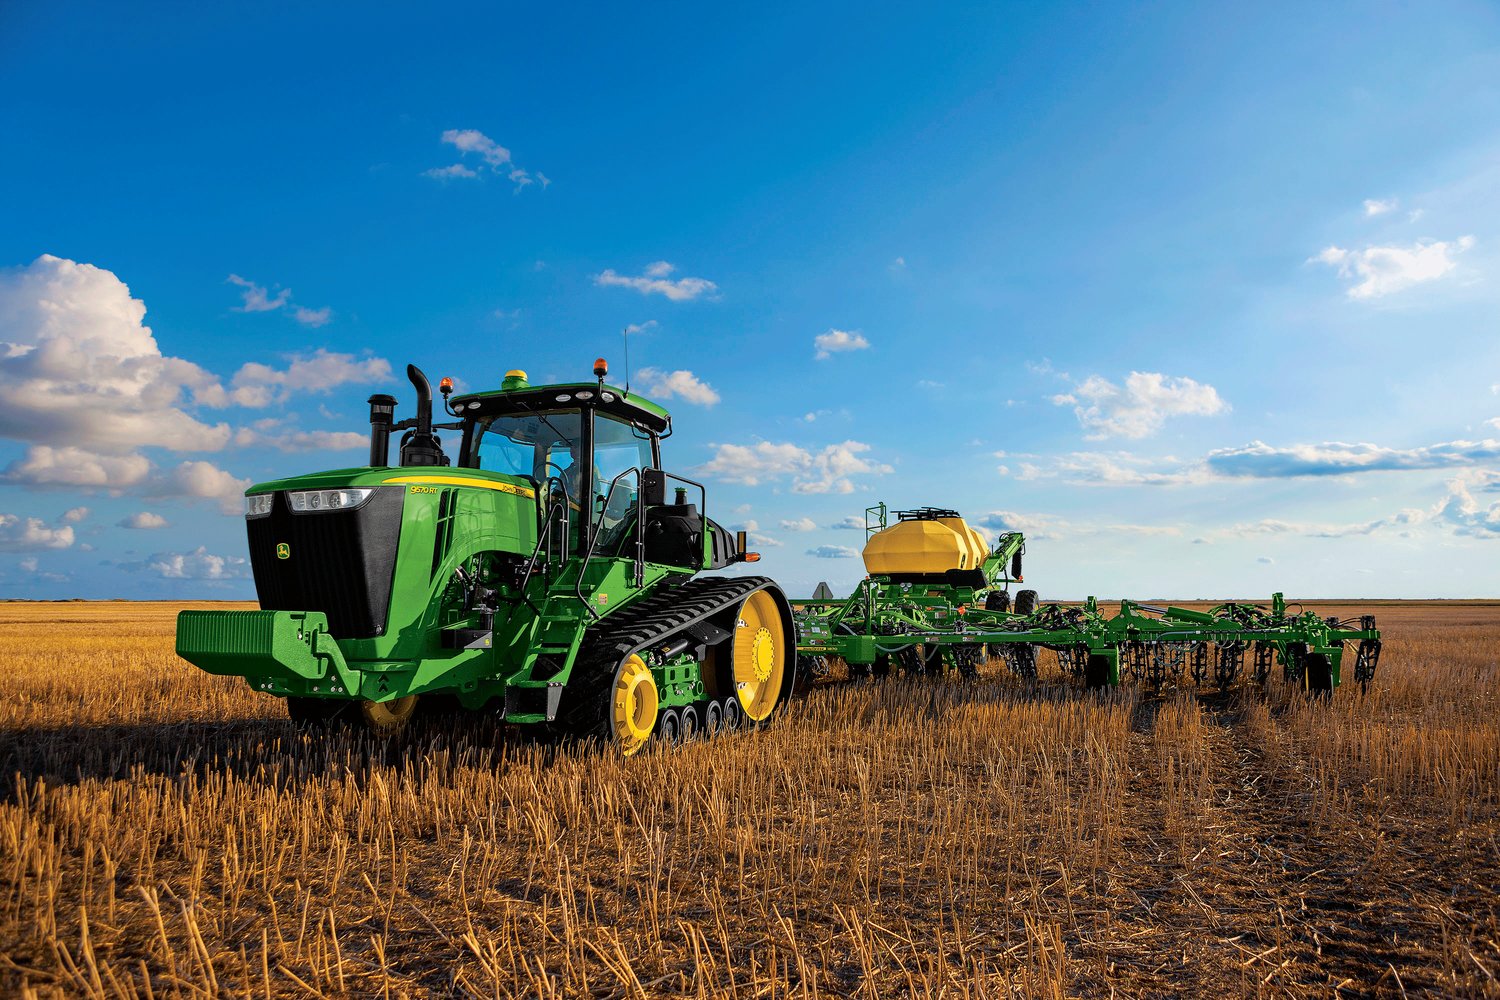 Pulling up the Curtain on the New Line of 2015 John Deere Products